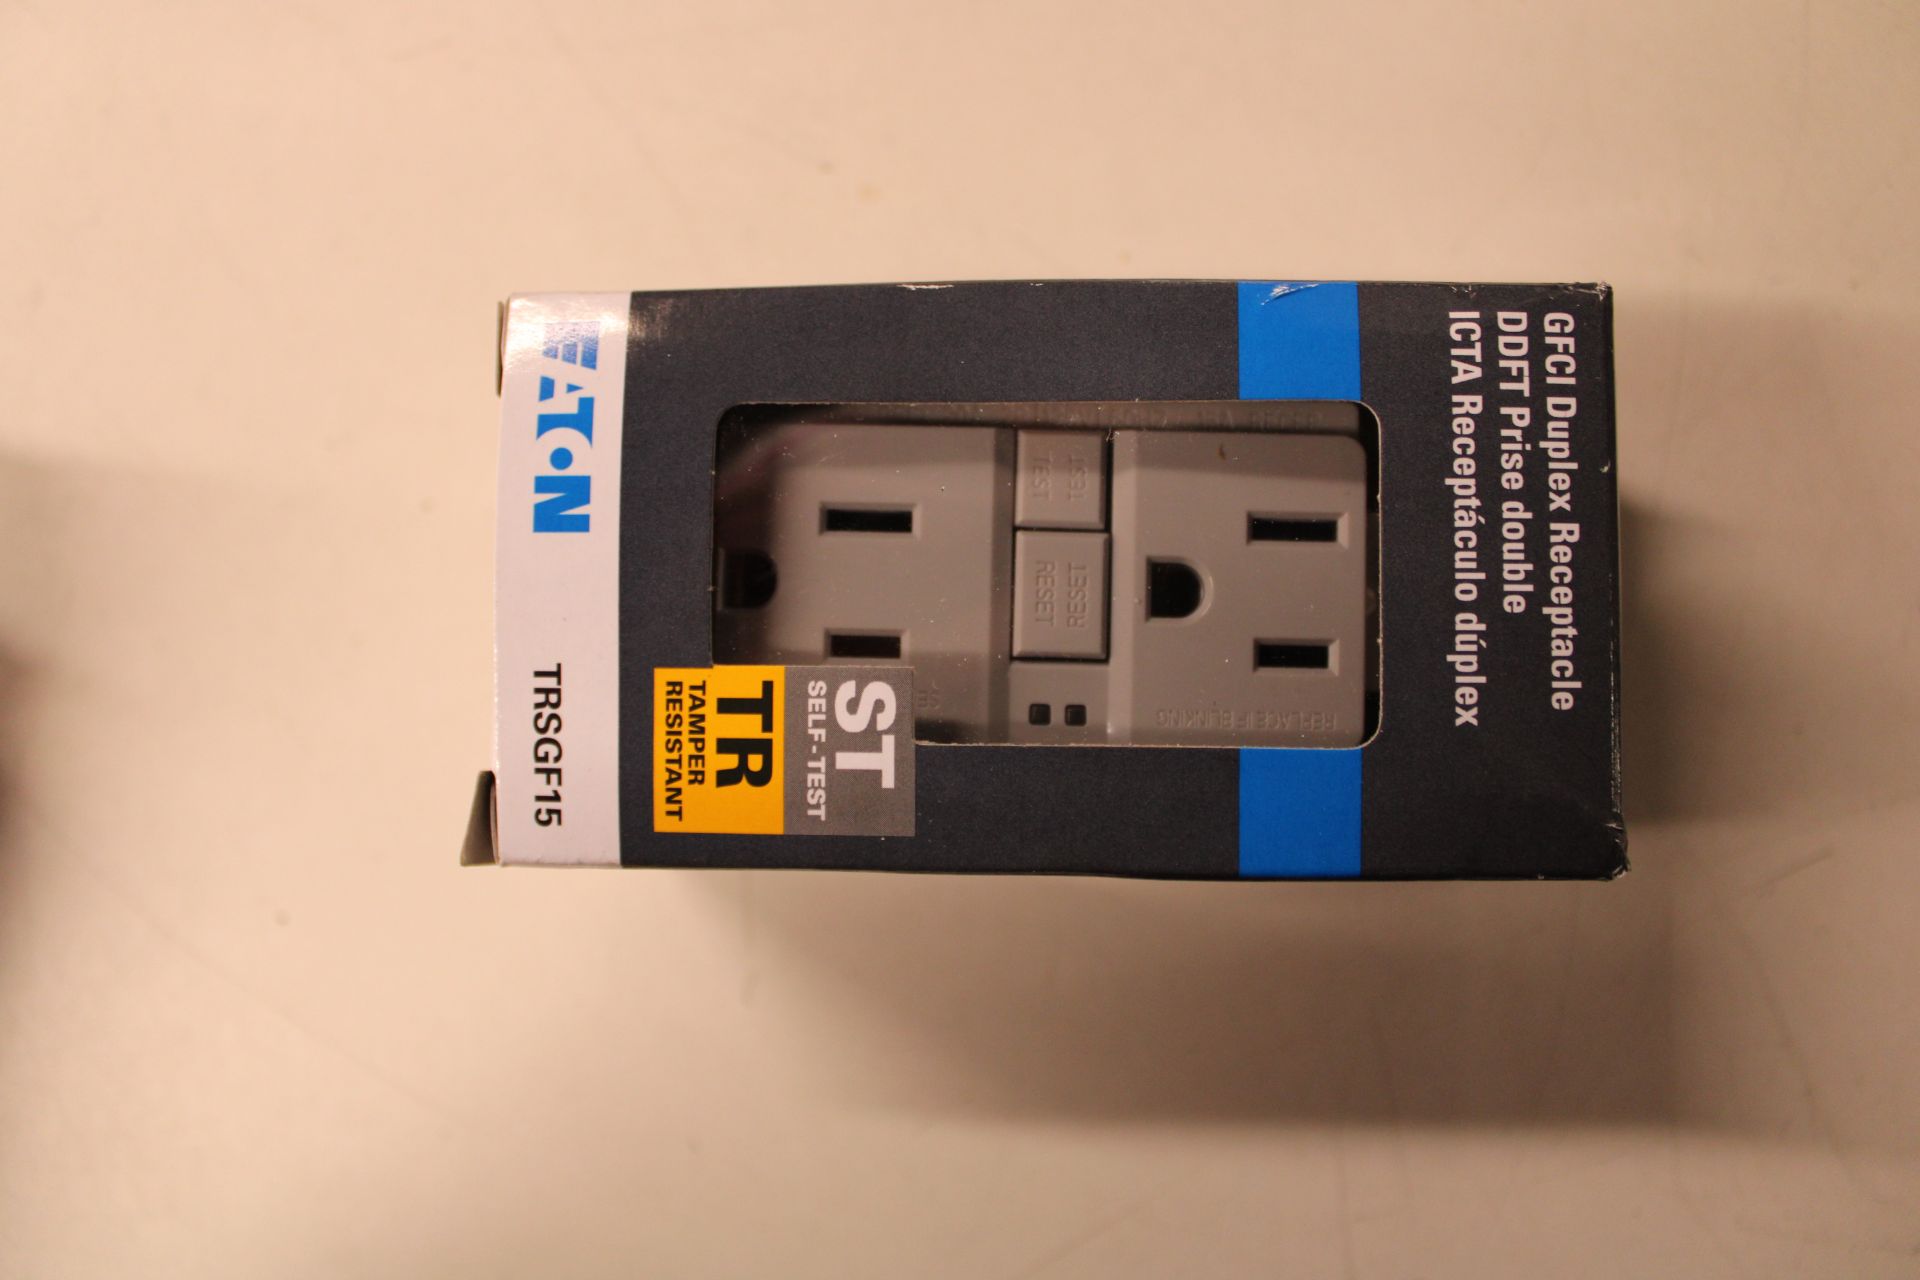 8x Eaton TRSGF15GY-BX-LW Surge Protection Devices (SPDs) EA